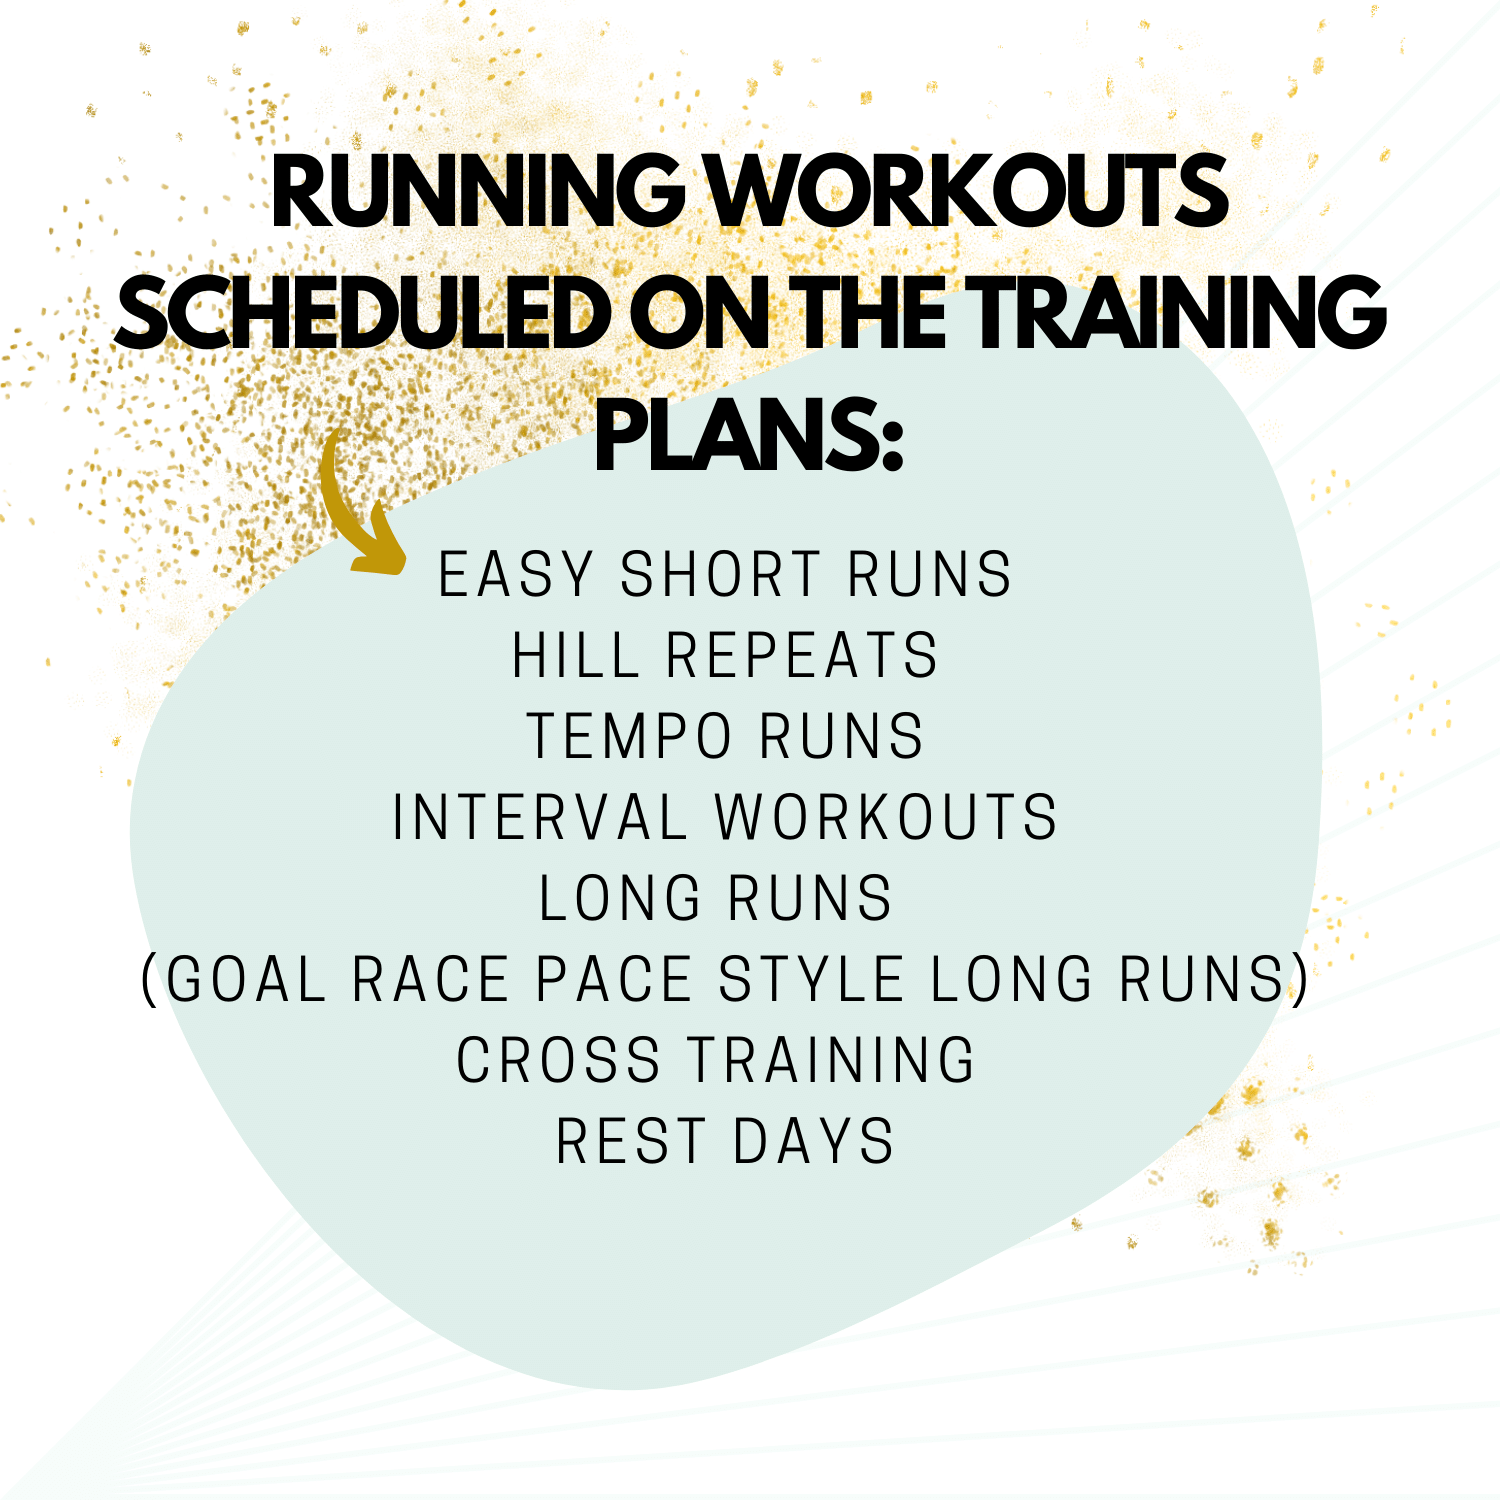 List of the running workouts that are inside the 12 week half marathon training plans for the 1:30, 1:45, 2 hours, 2:15, 2:30, 2:45 and 3 hour half marathon finishing time goal